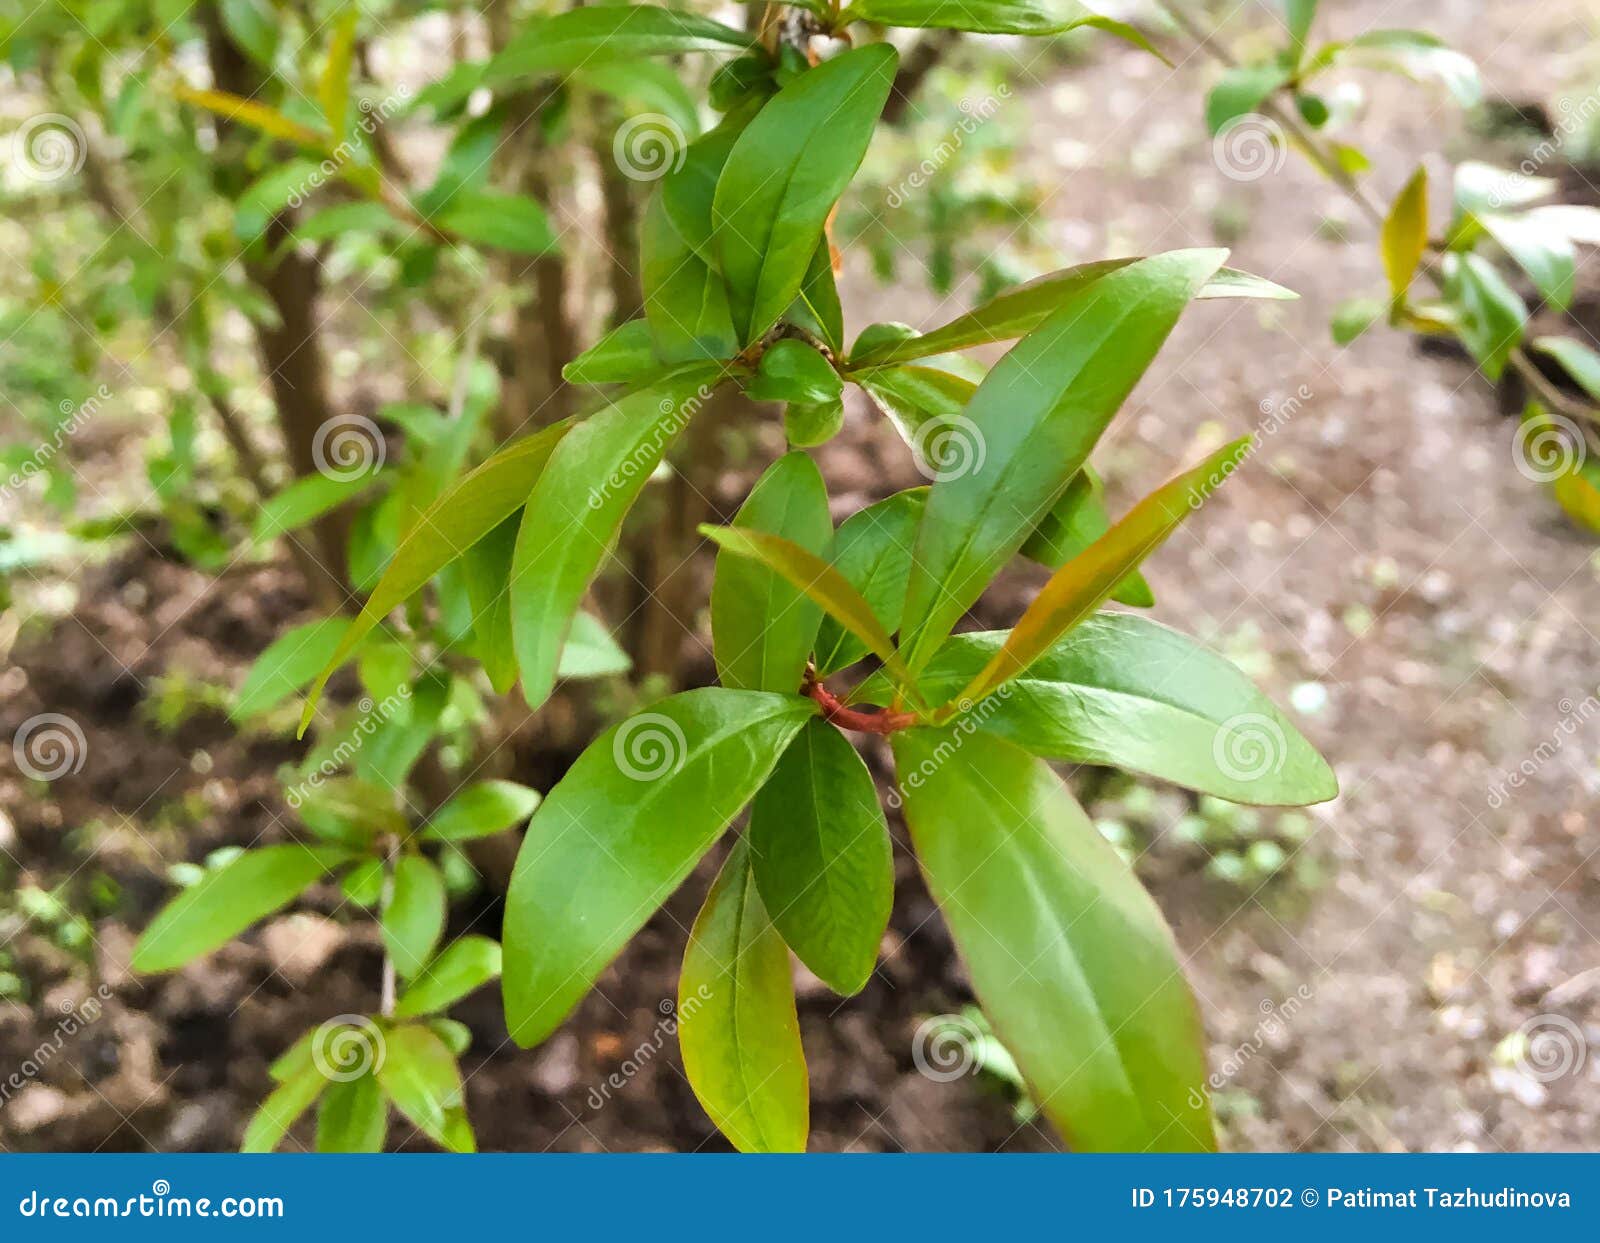 Pomegranate Branch With Small Leaves In Spring In The Garden Pomegranate Tree With Young Leaves Stock Photo Image Of Crimson Branch 175948702